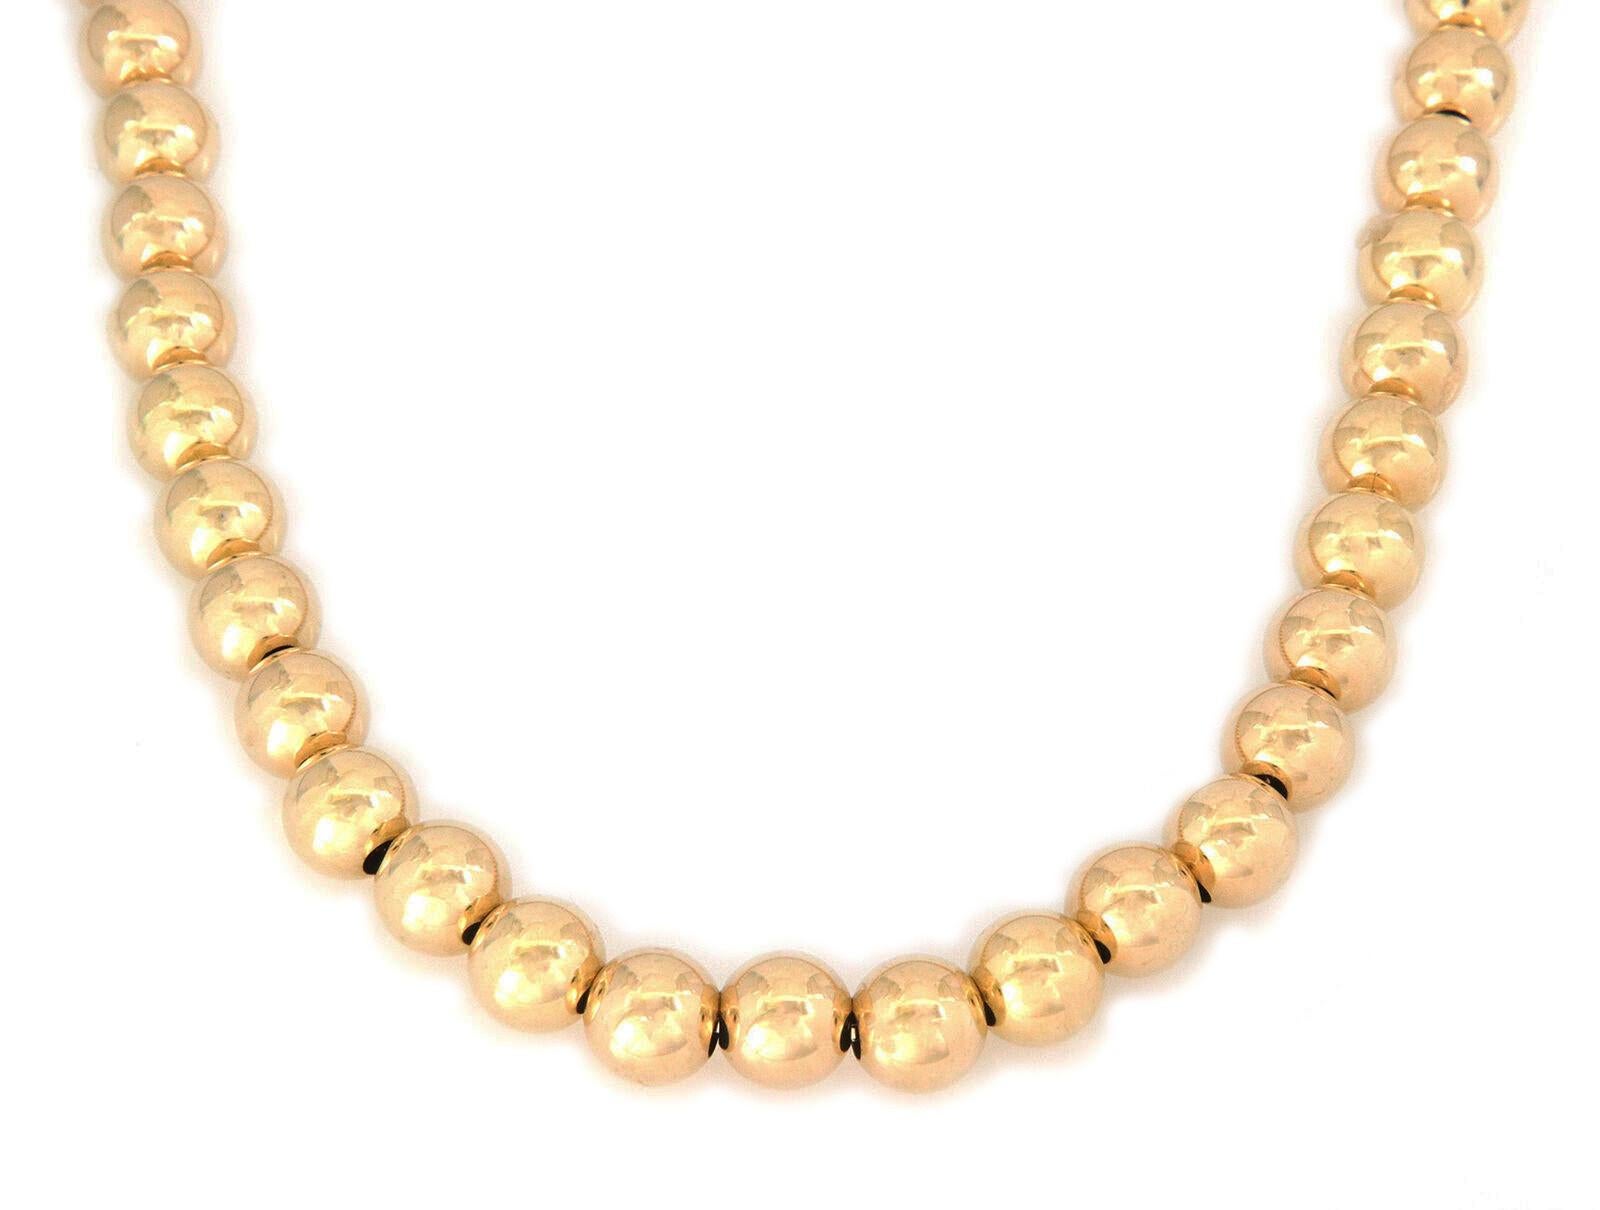 Vintage 14k Yellow Gold 9mm Beaded Necklace In Good Condition For Sale In Boca Raton, FL